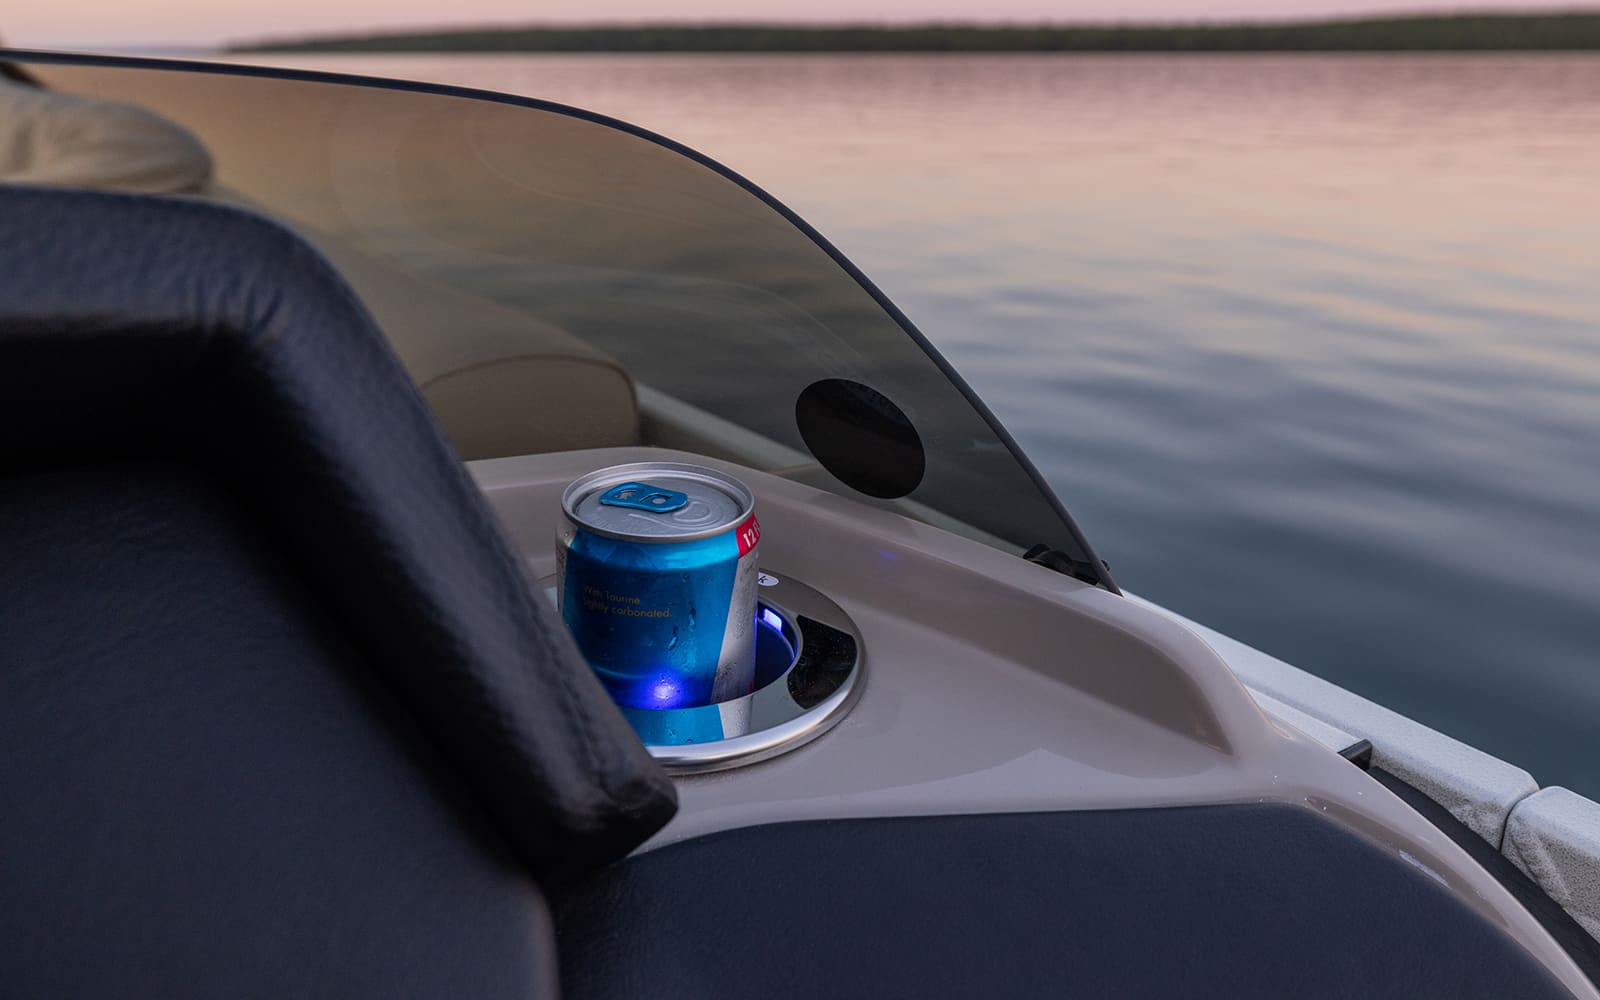 Refrigerated cup holders